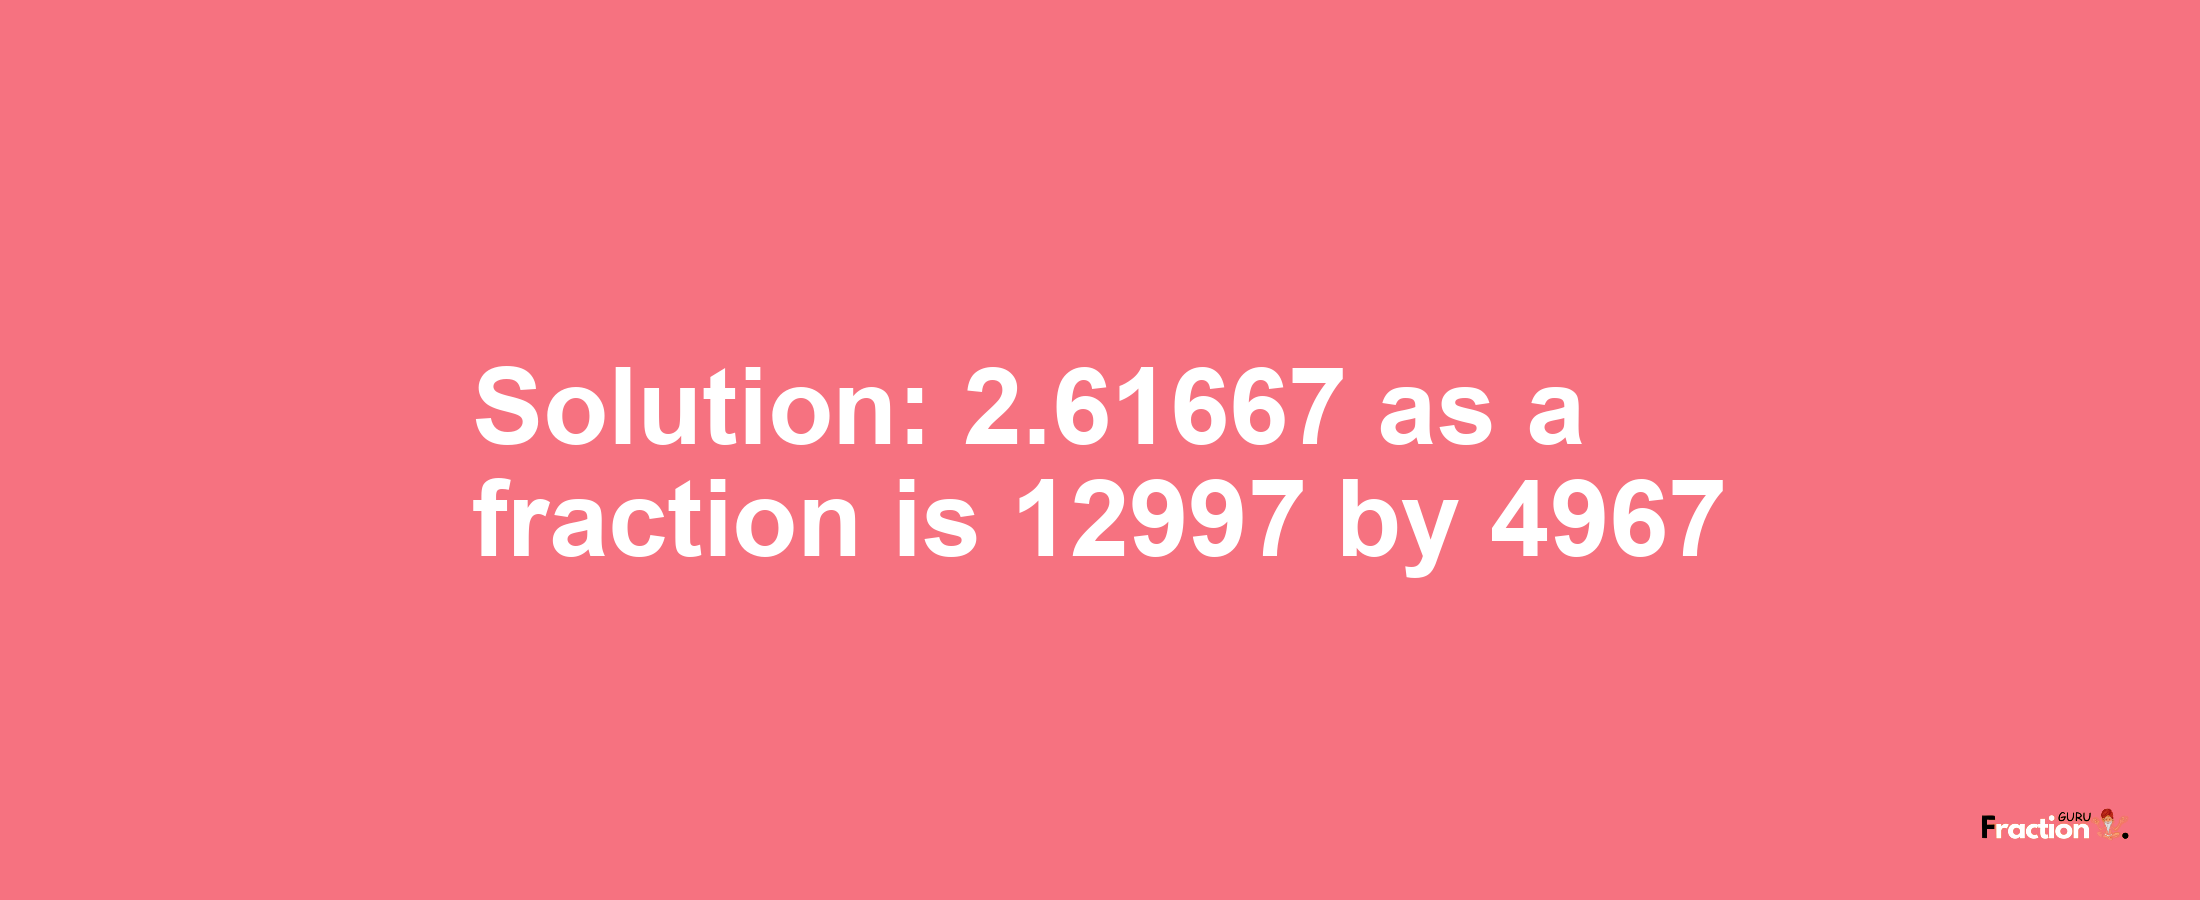 Solution:2.61667 as a fraction is 12997/4967